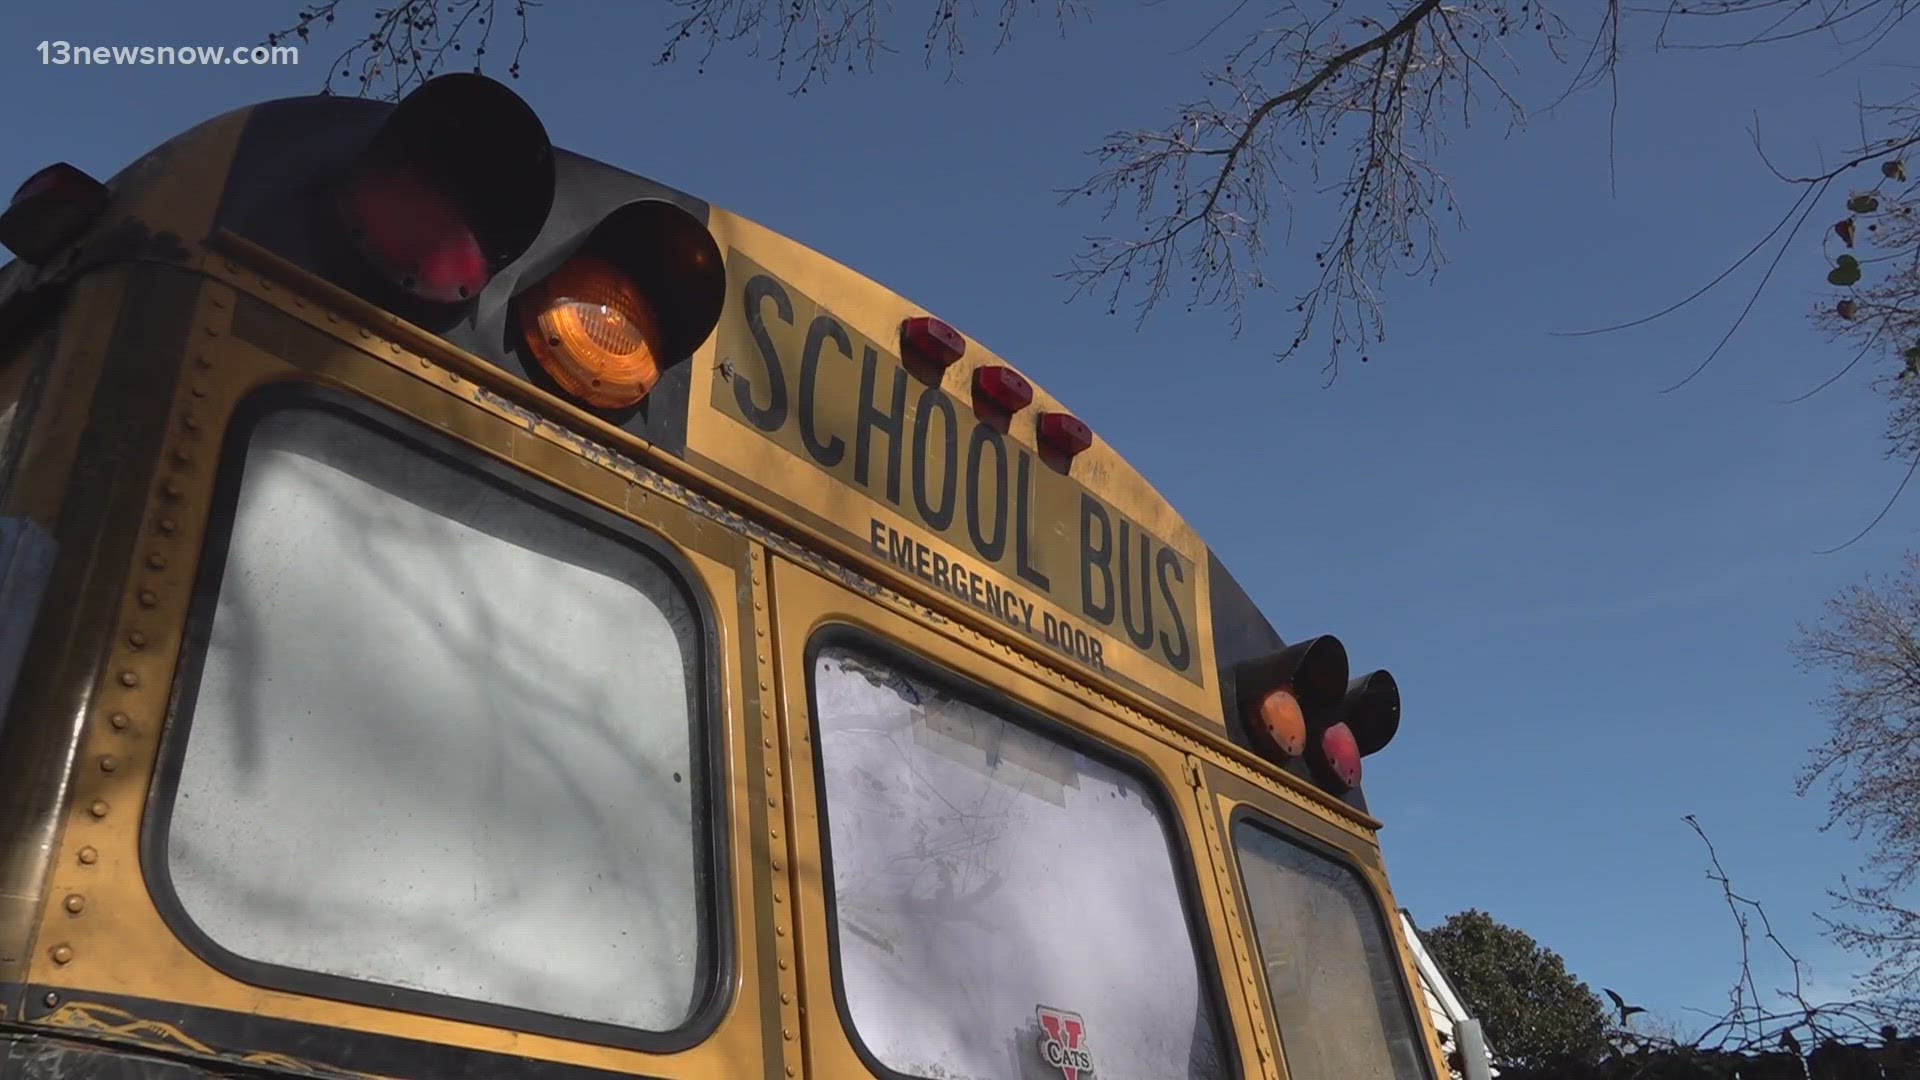 One family wants to turn an old school bus into their home but are running into problems with the city of Norfolk.